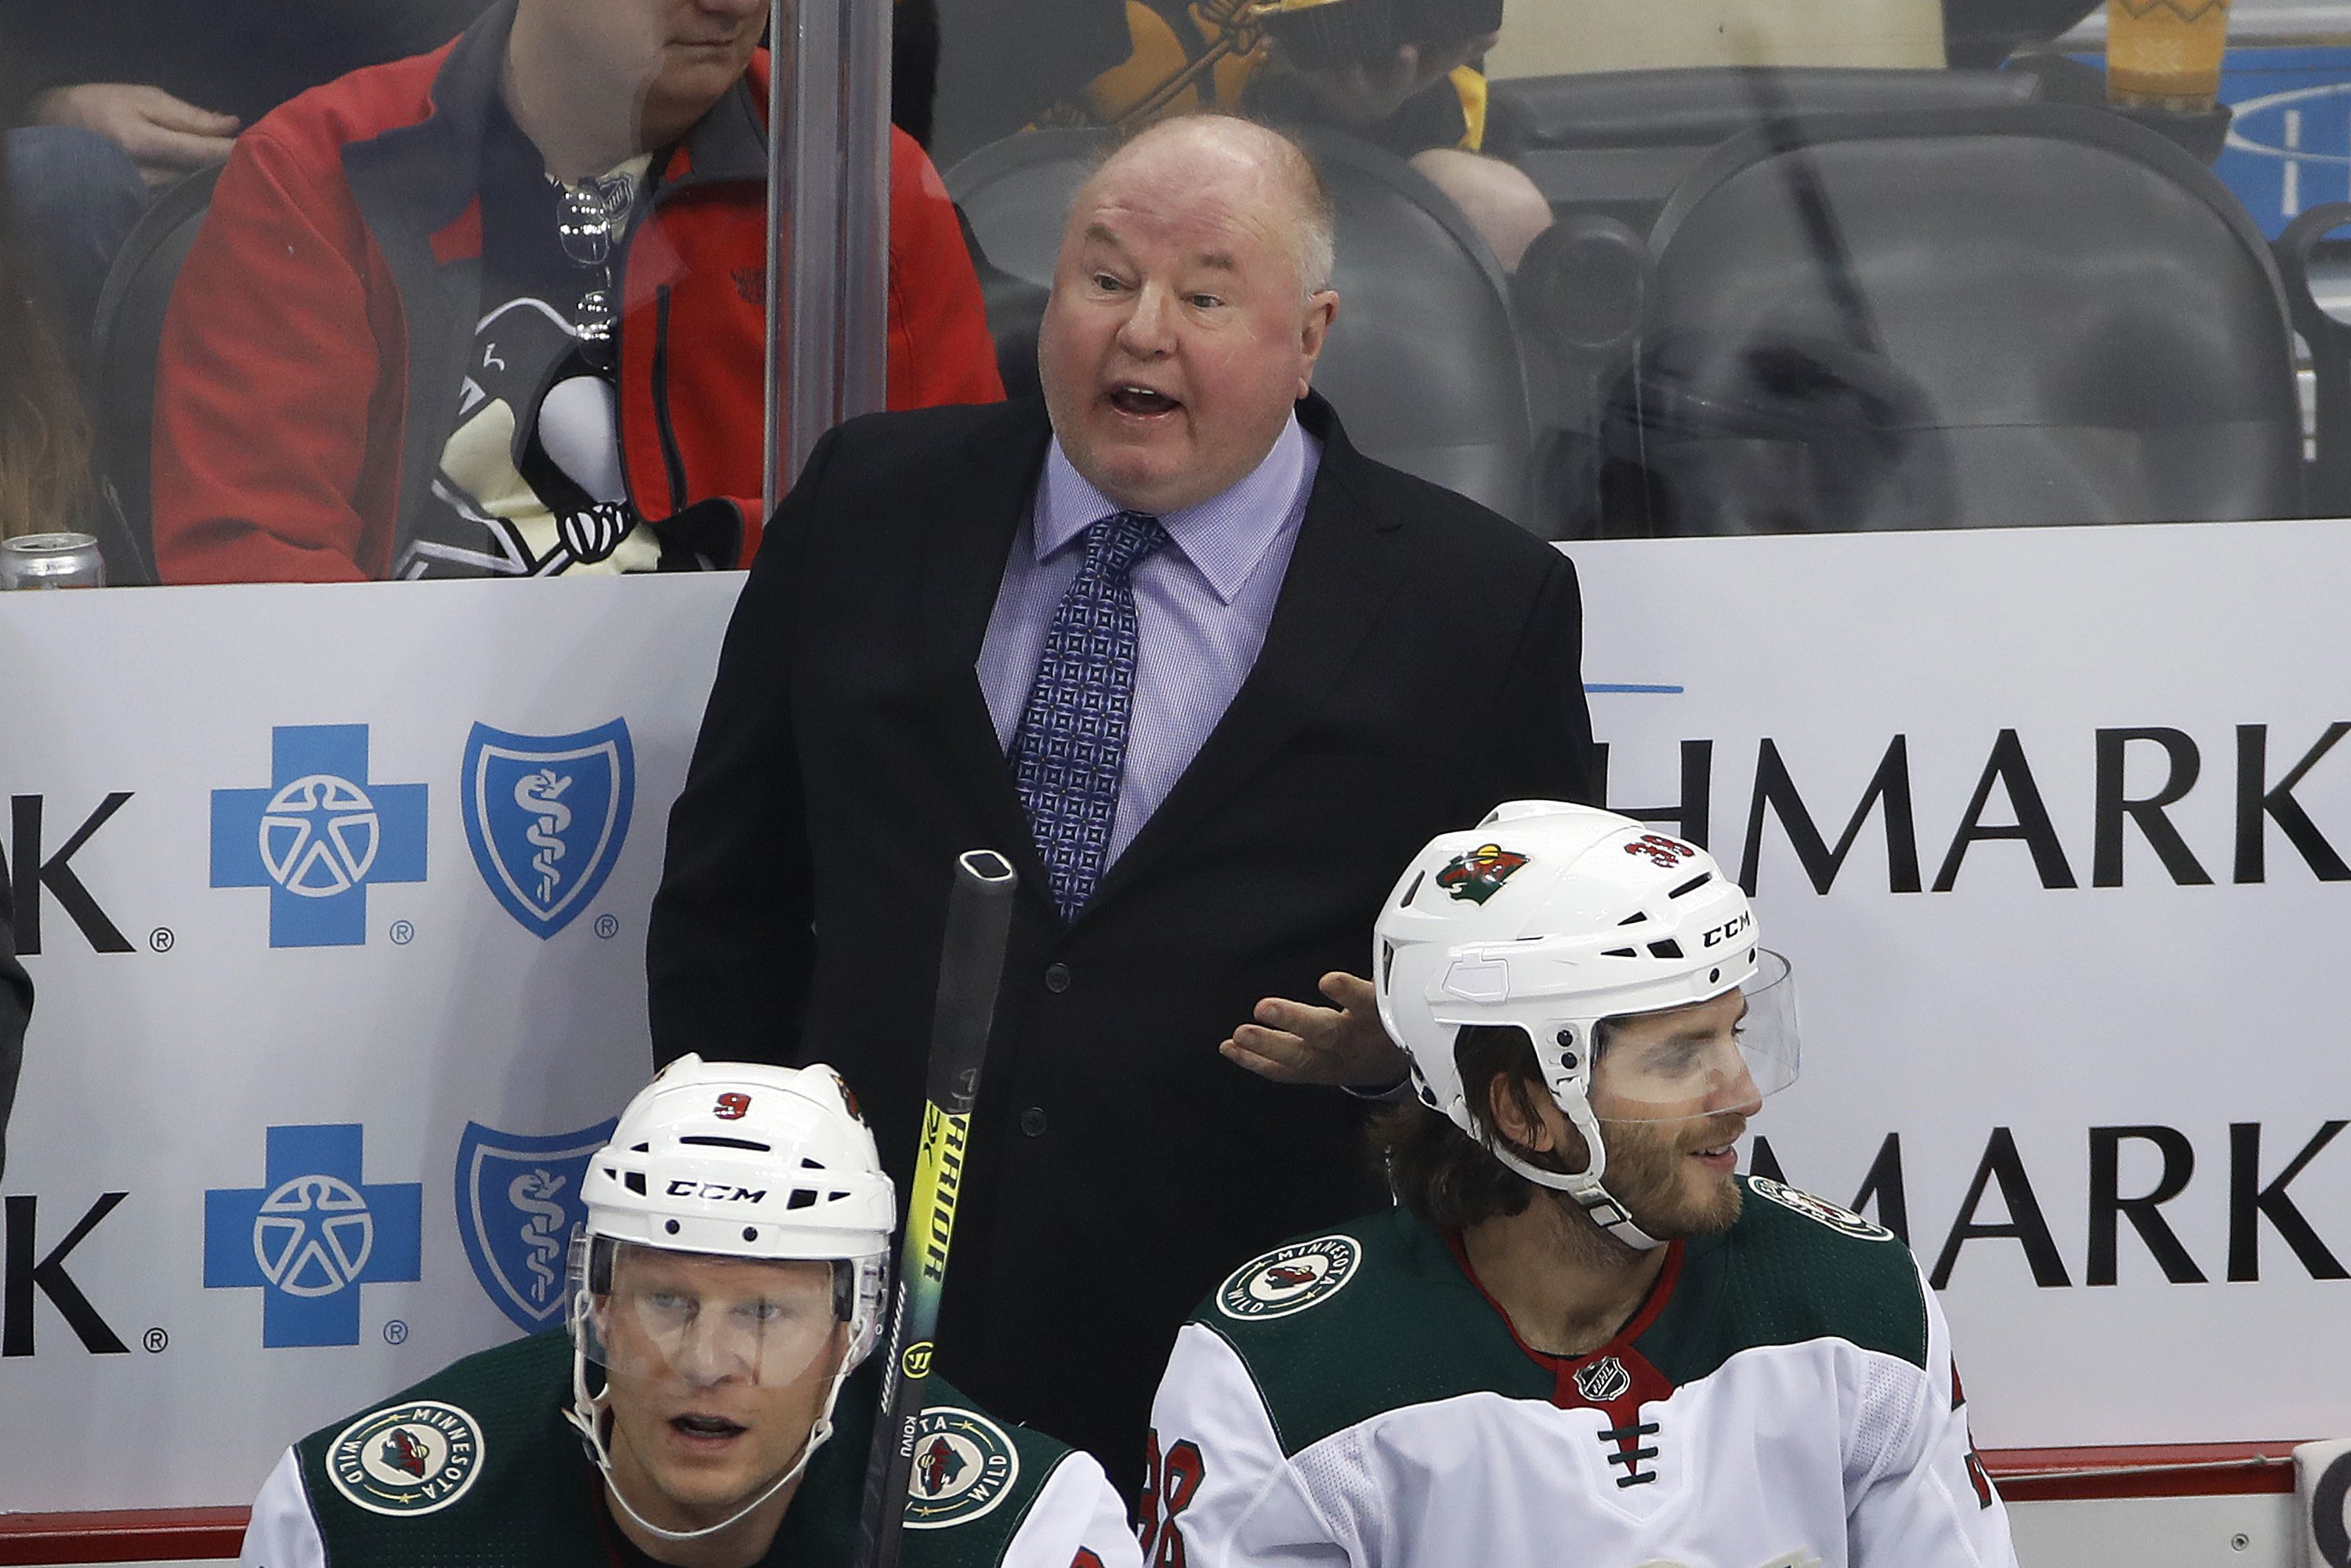 Anaheim Ducks had to fire coach Bruce Boudreau - Sports Illustrated